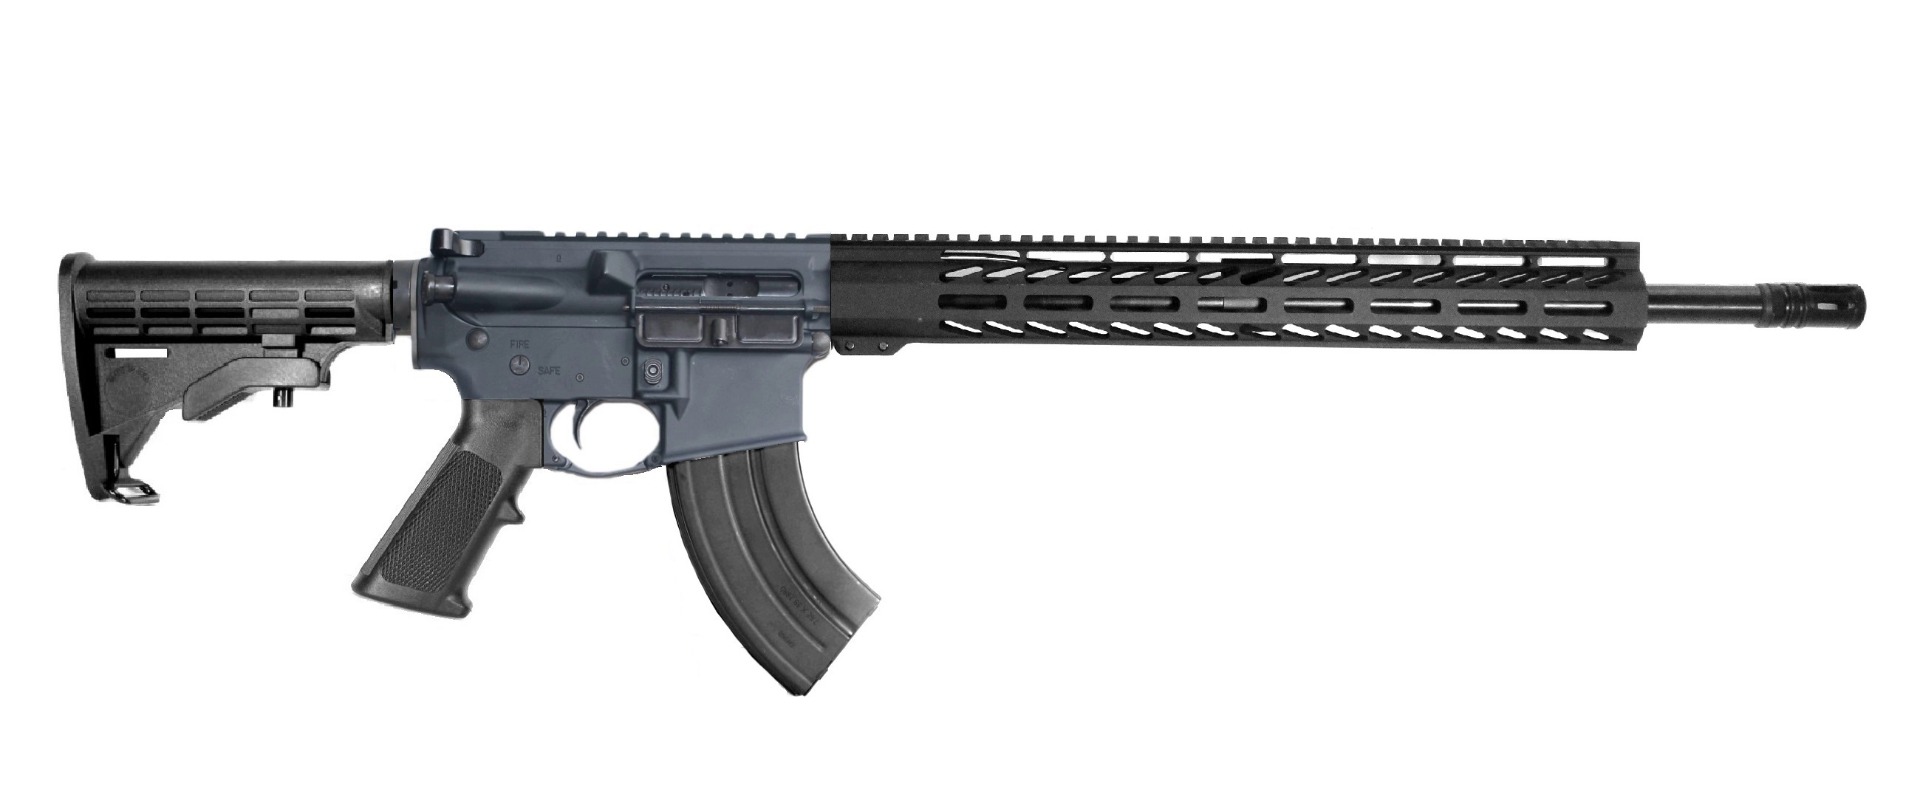 Shop 18 inch 7.62x39 AR-15 Rifle - In Stock & Ready to Ship!